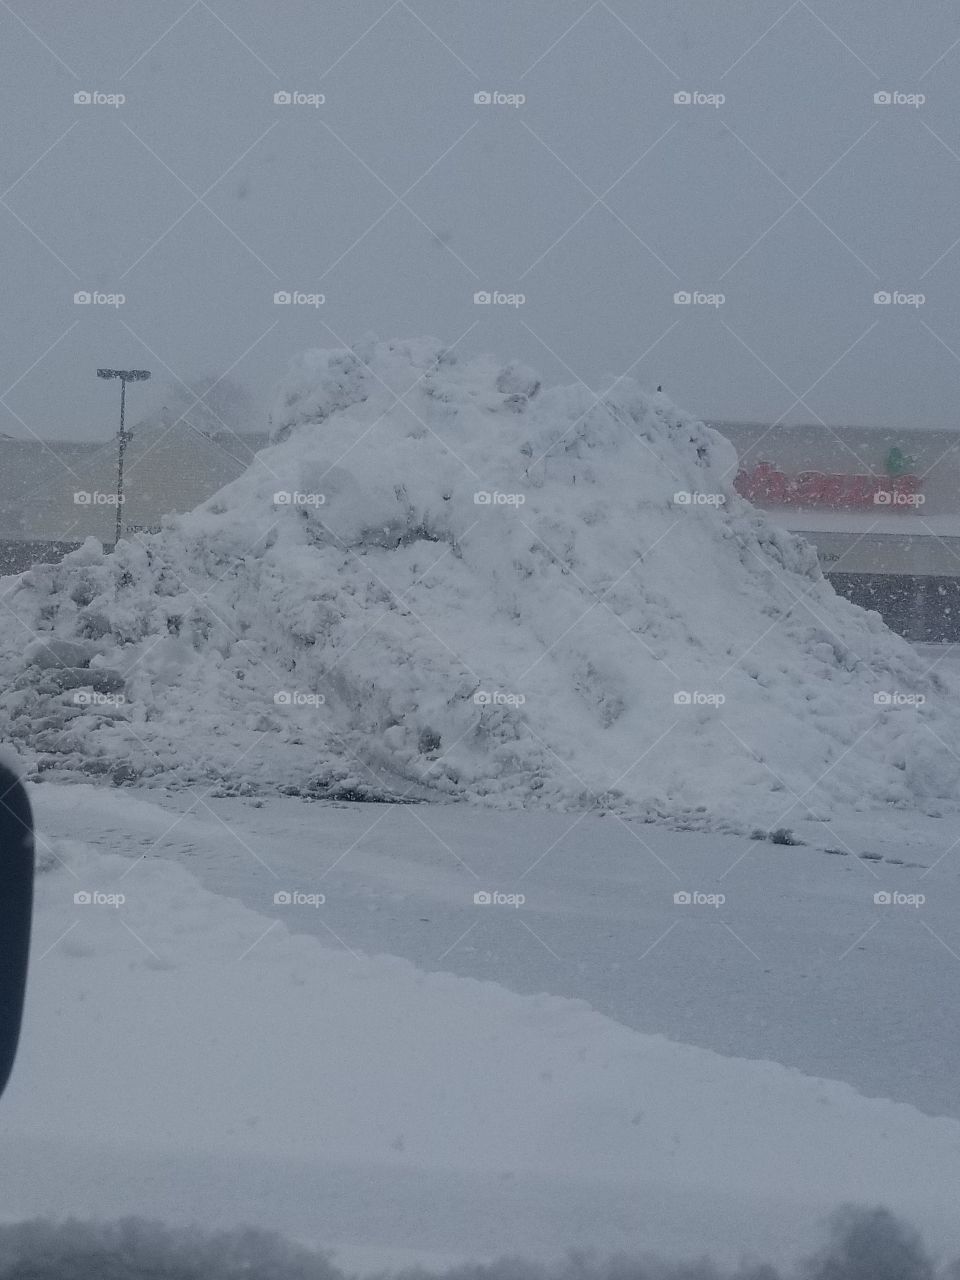 worcester ma storm march 2018